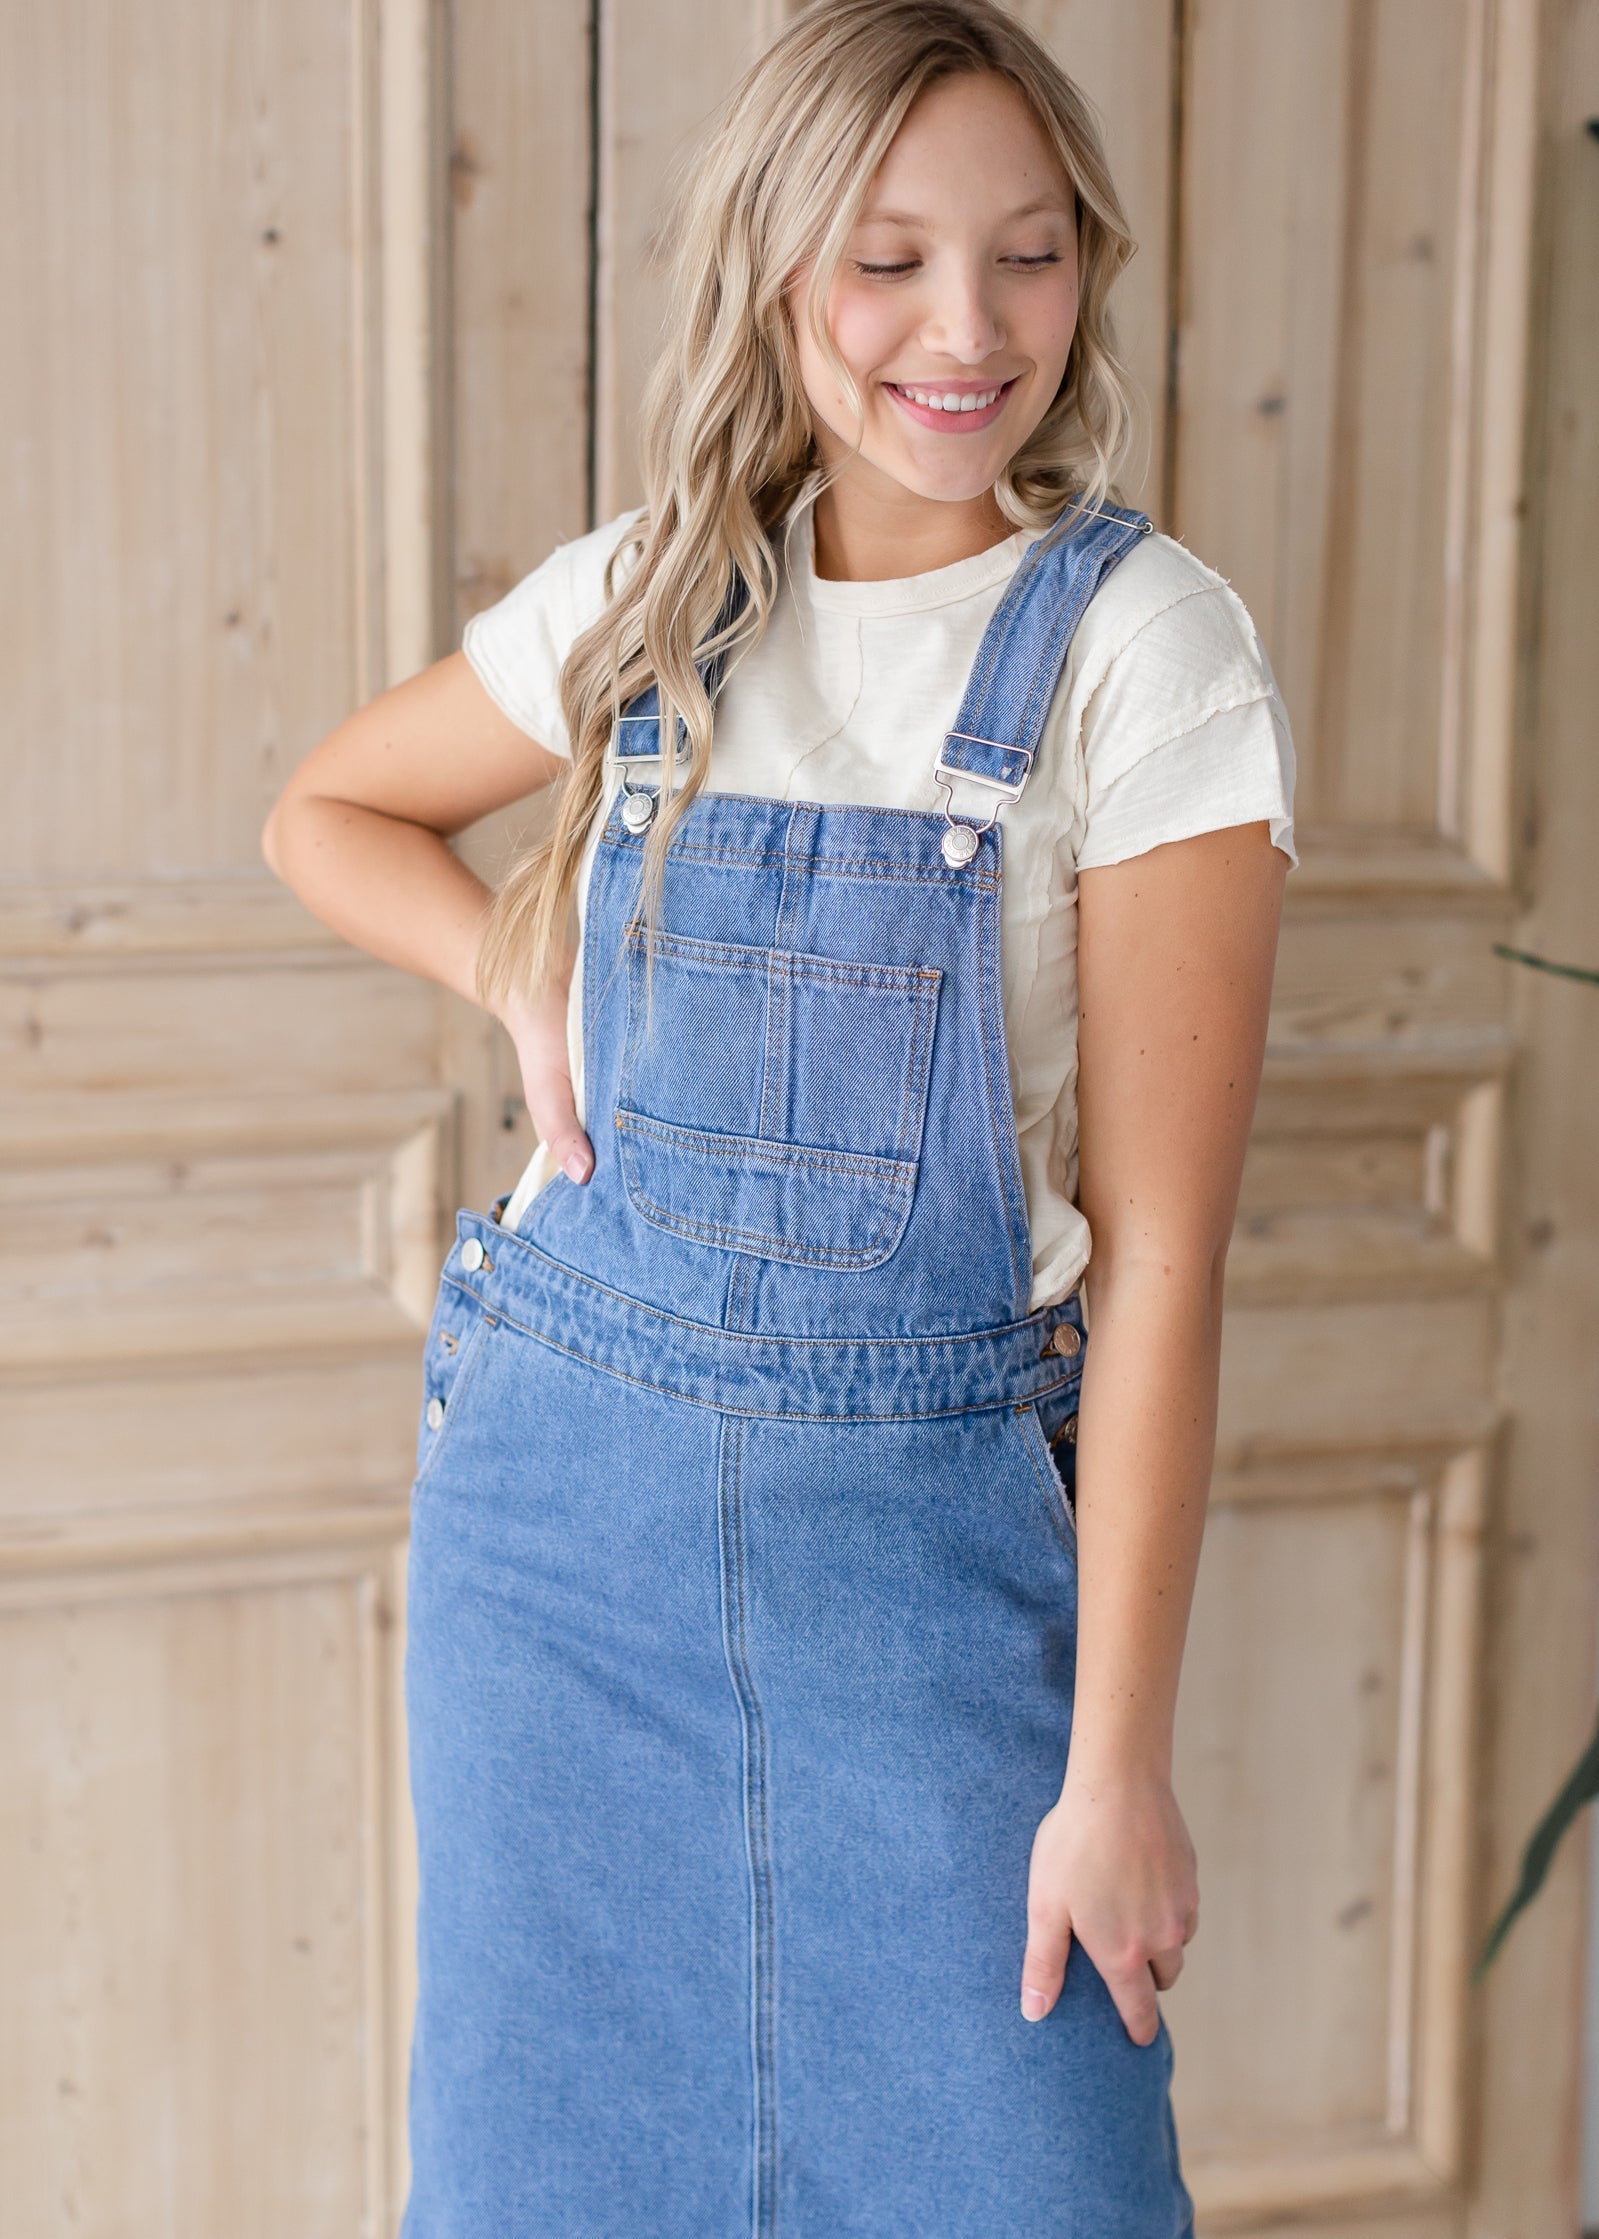 Back At It Denim Overall Dress | Overall dress, Denim overall dress, Dress